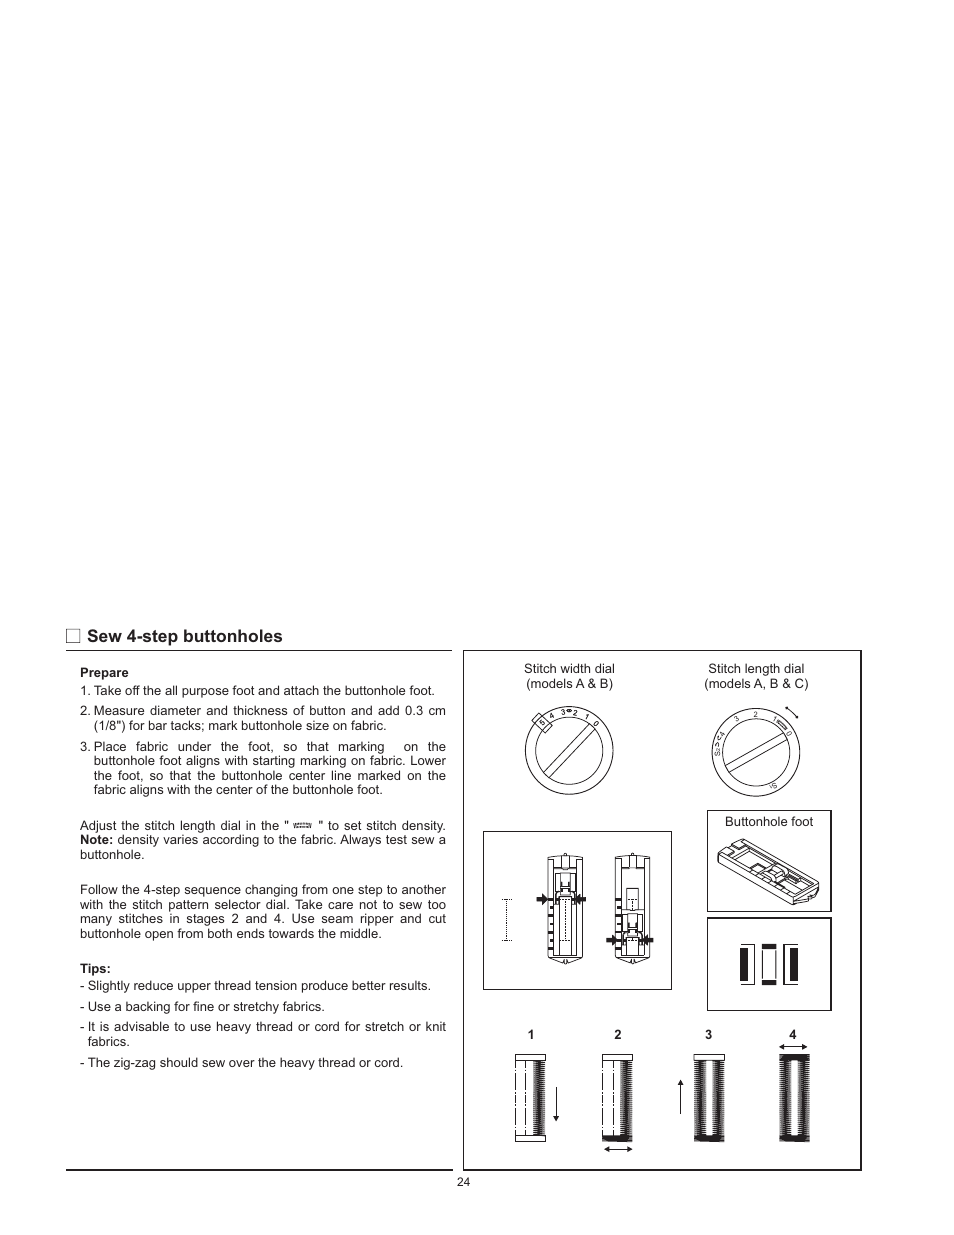 Sew 4-step buttonholes | SINGER 1120 User Manual | Page 27 / 38